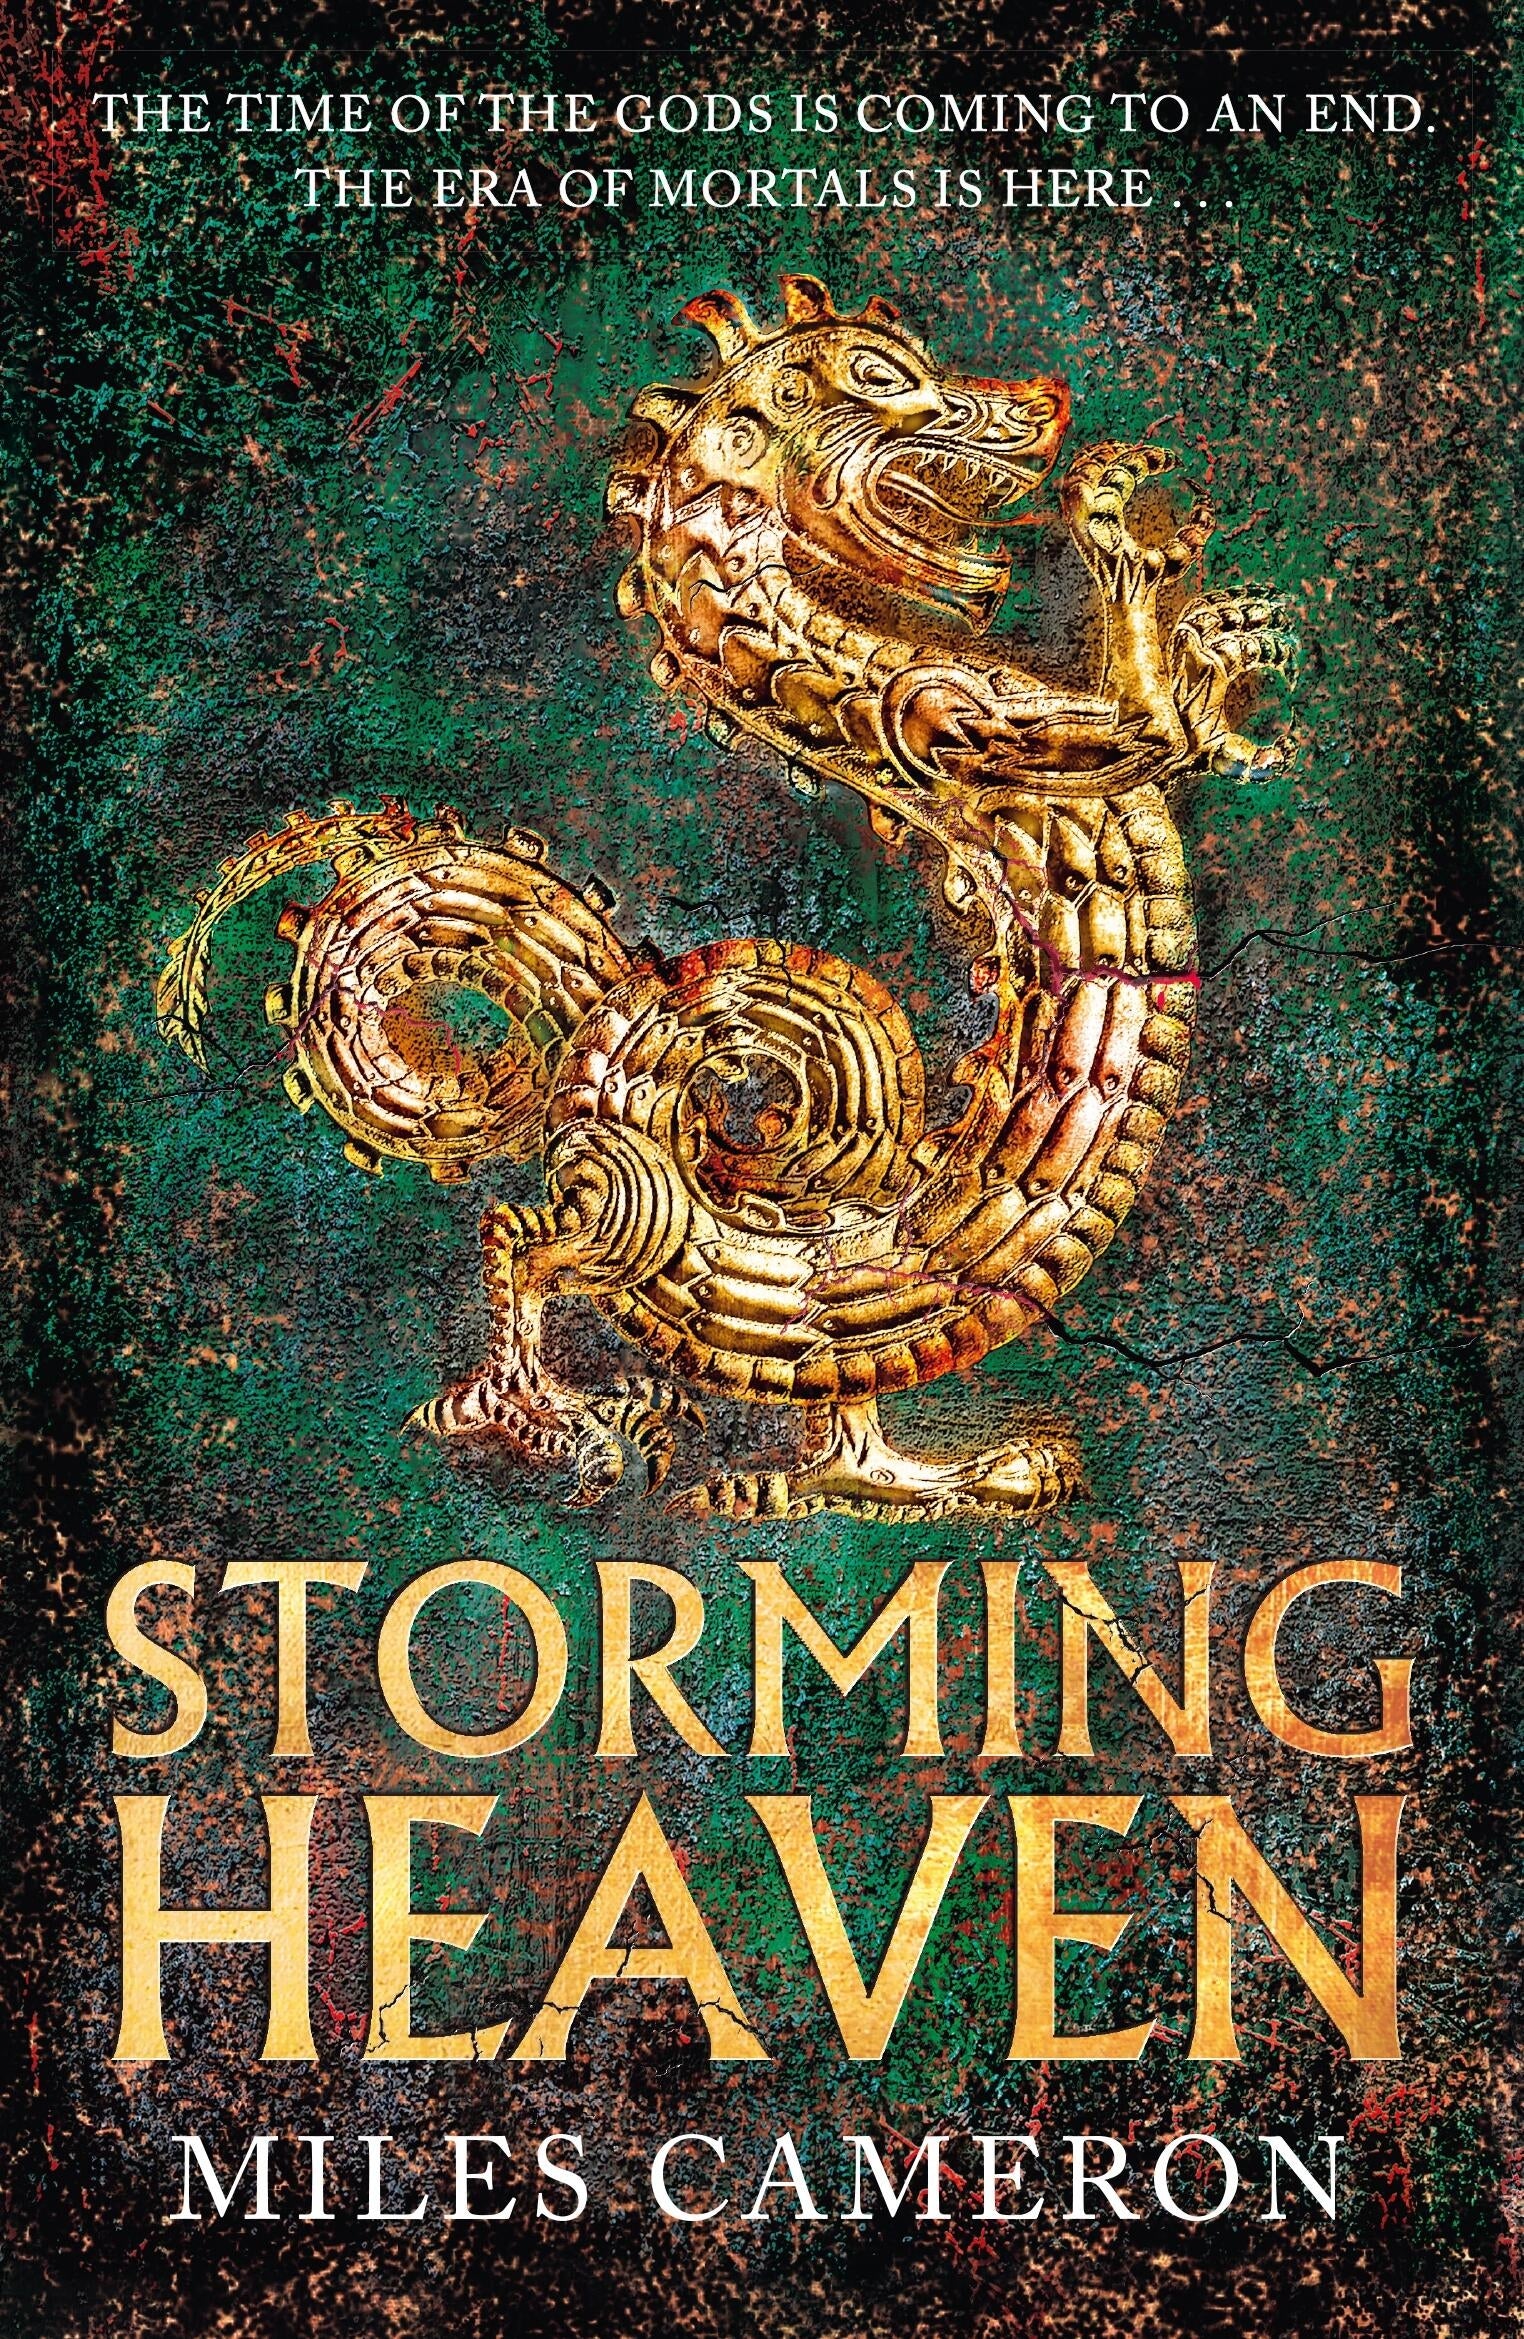 Storming Heaven by Miles Cameron